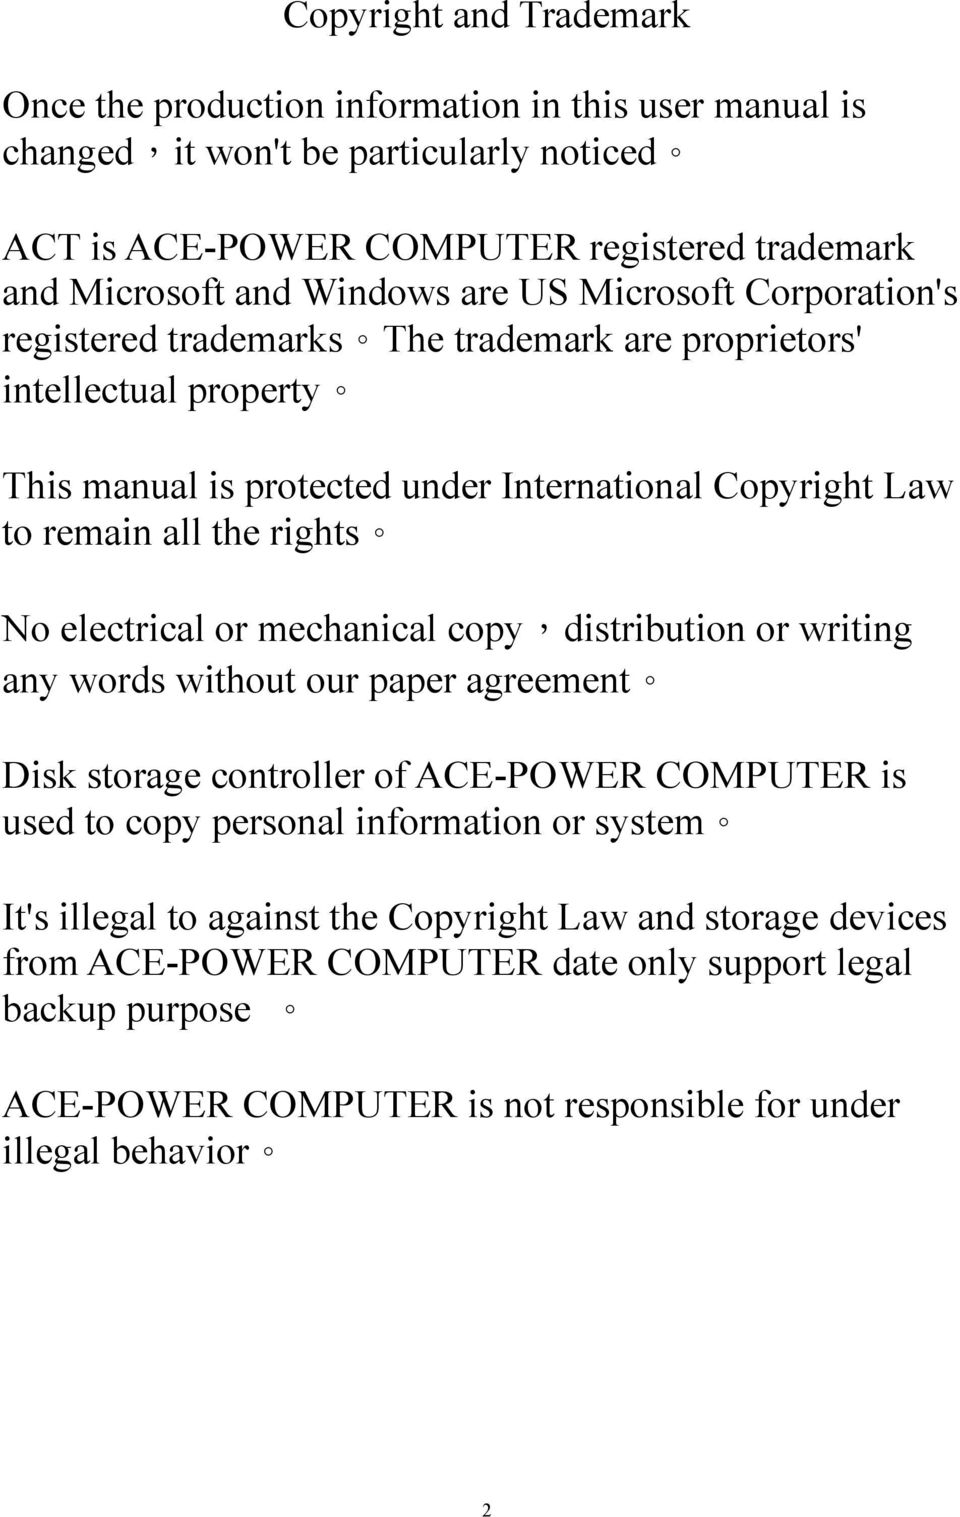 rights No electrical or mechanical copy distribution or writing any words without our paper agreement Disk storage controller of ACE-POWER COMPUTER is used to copy personal information or